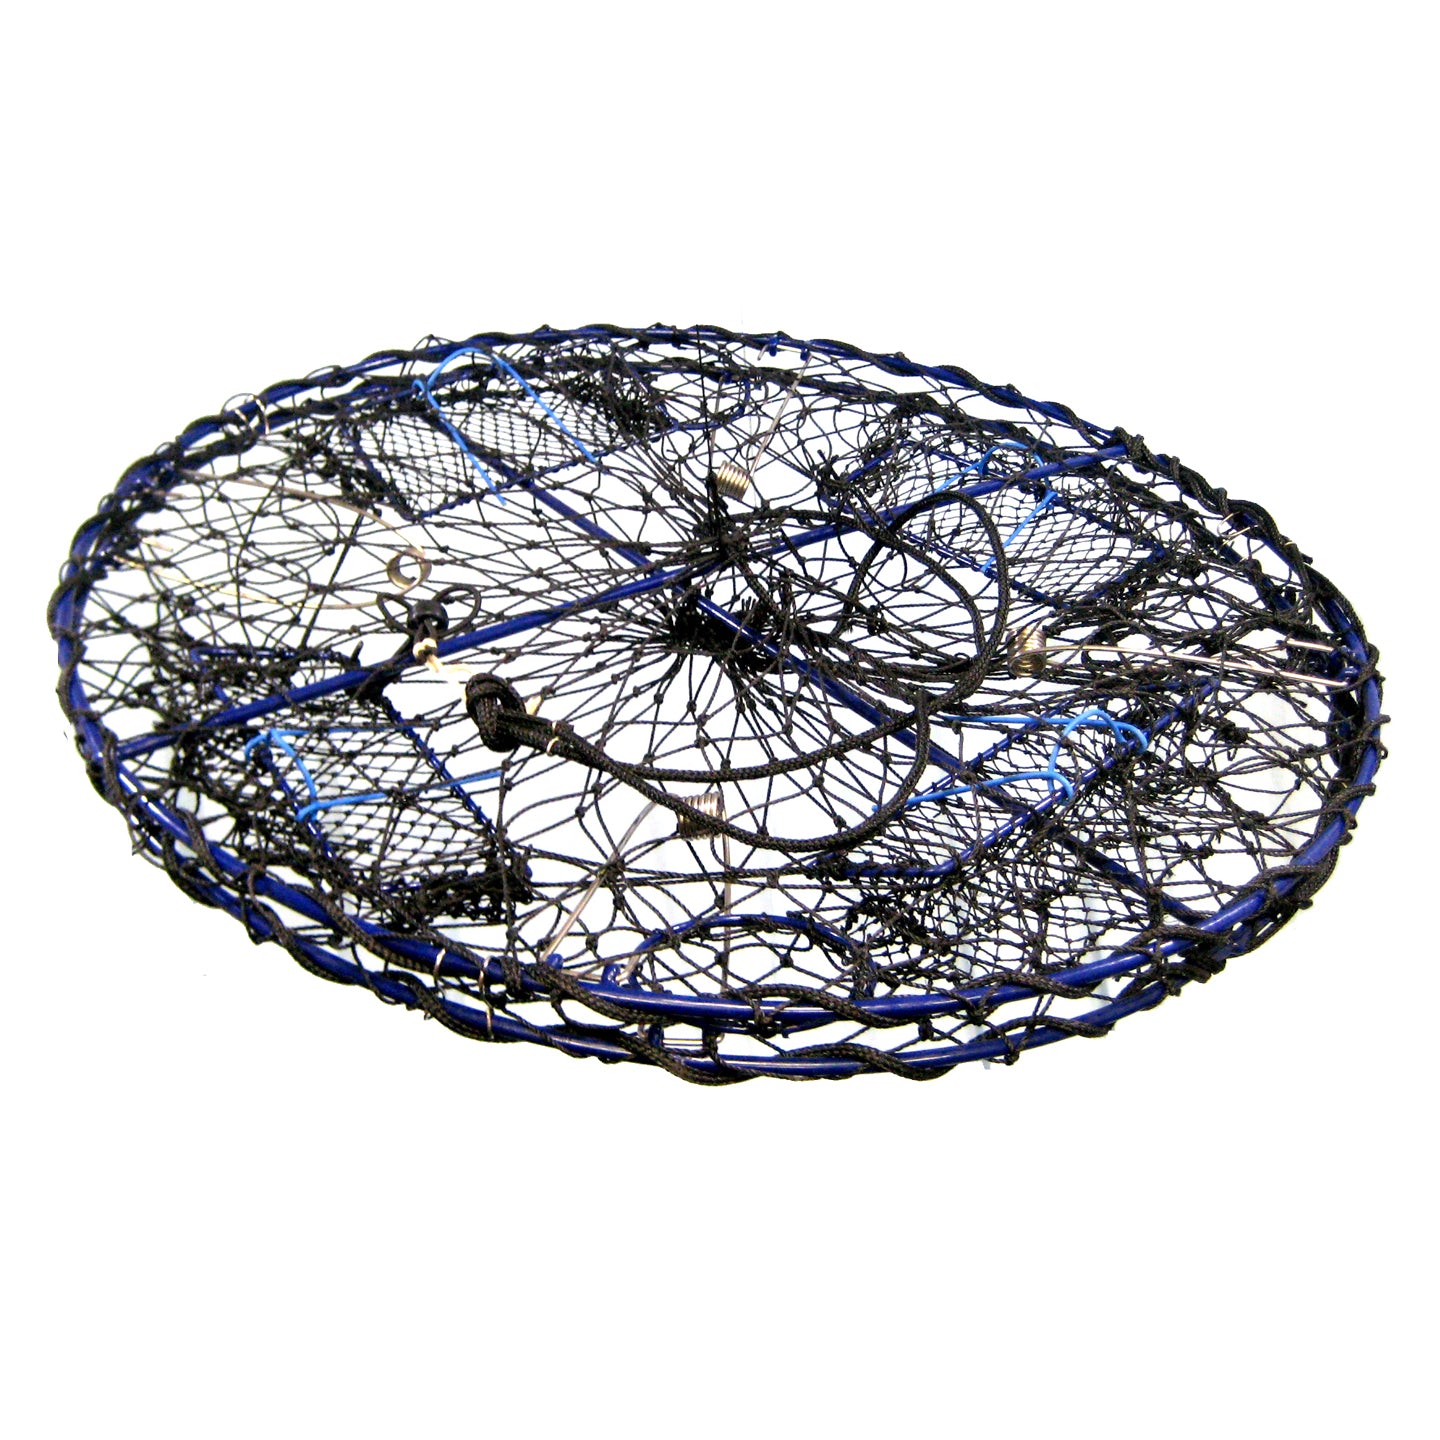 Heavy Duty Collapsible Crab Pot 32" x 12"